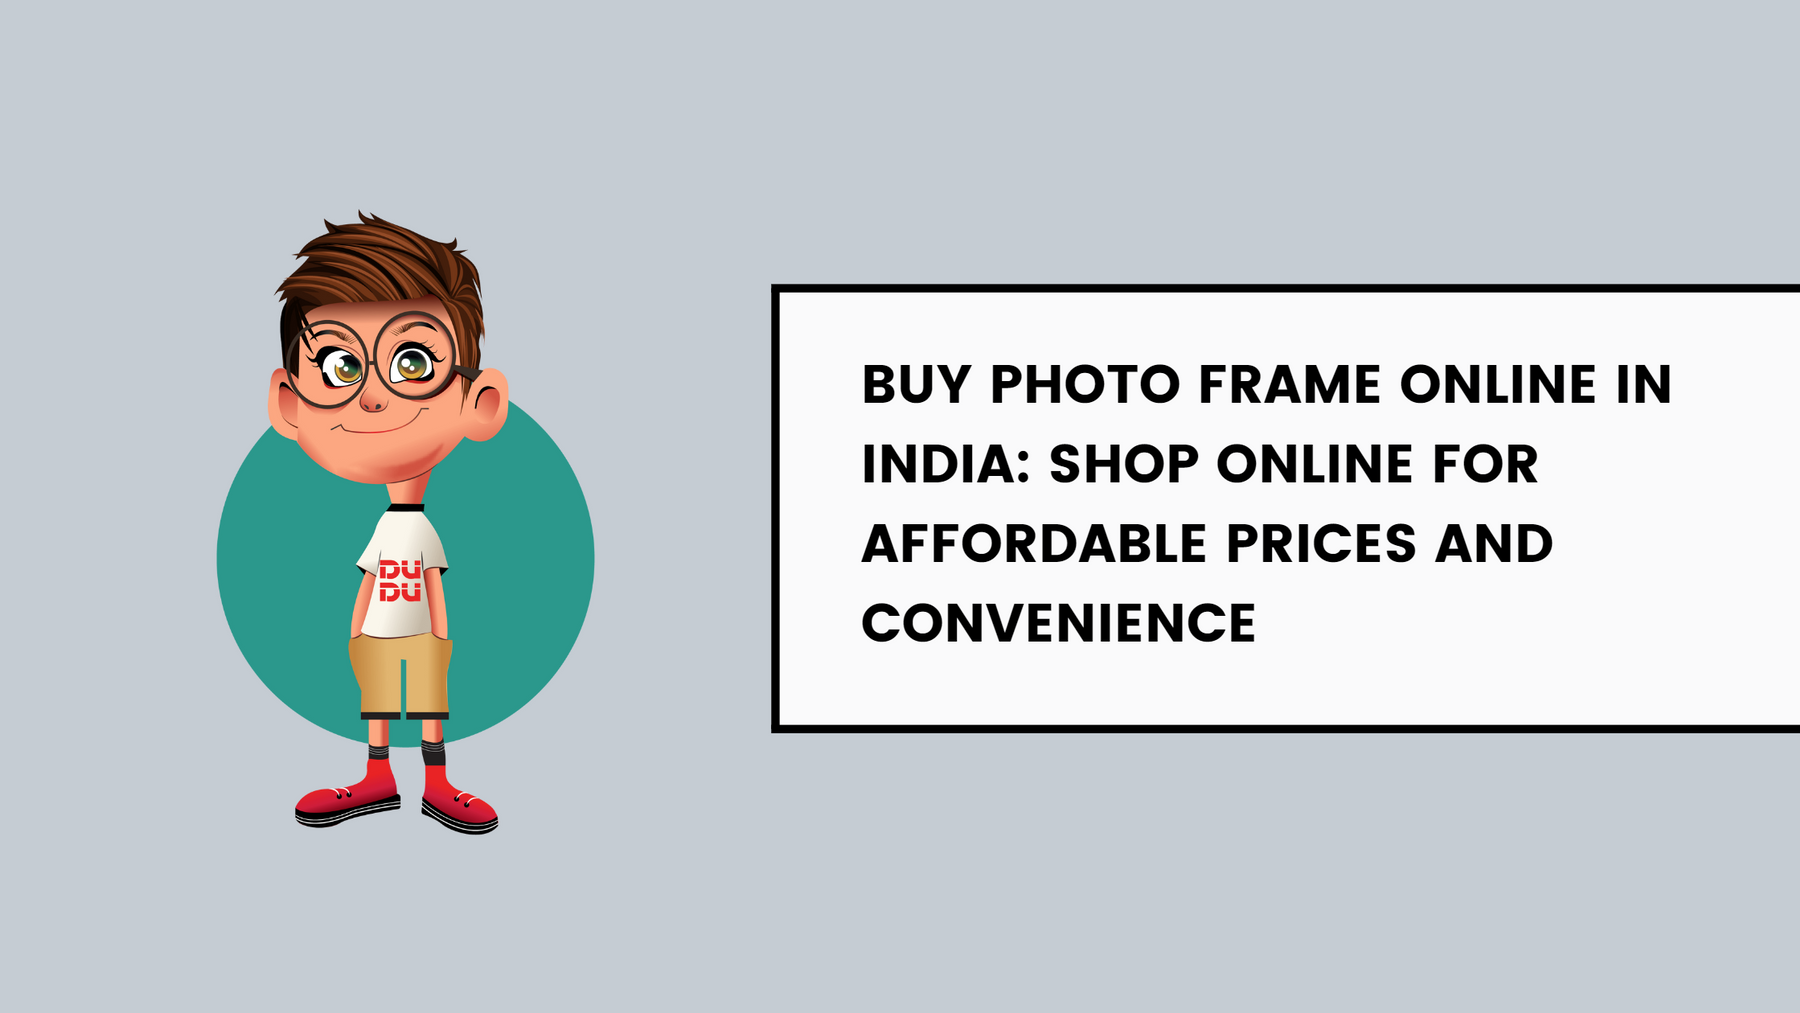 Buy Photo Frame Online in India: Shop Online for Affordable Prices and Convenience